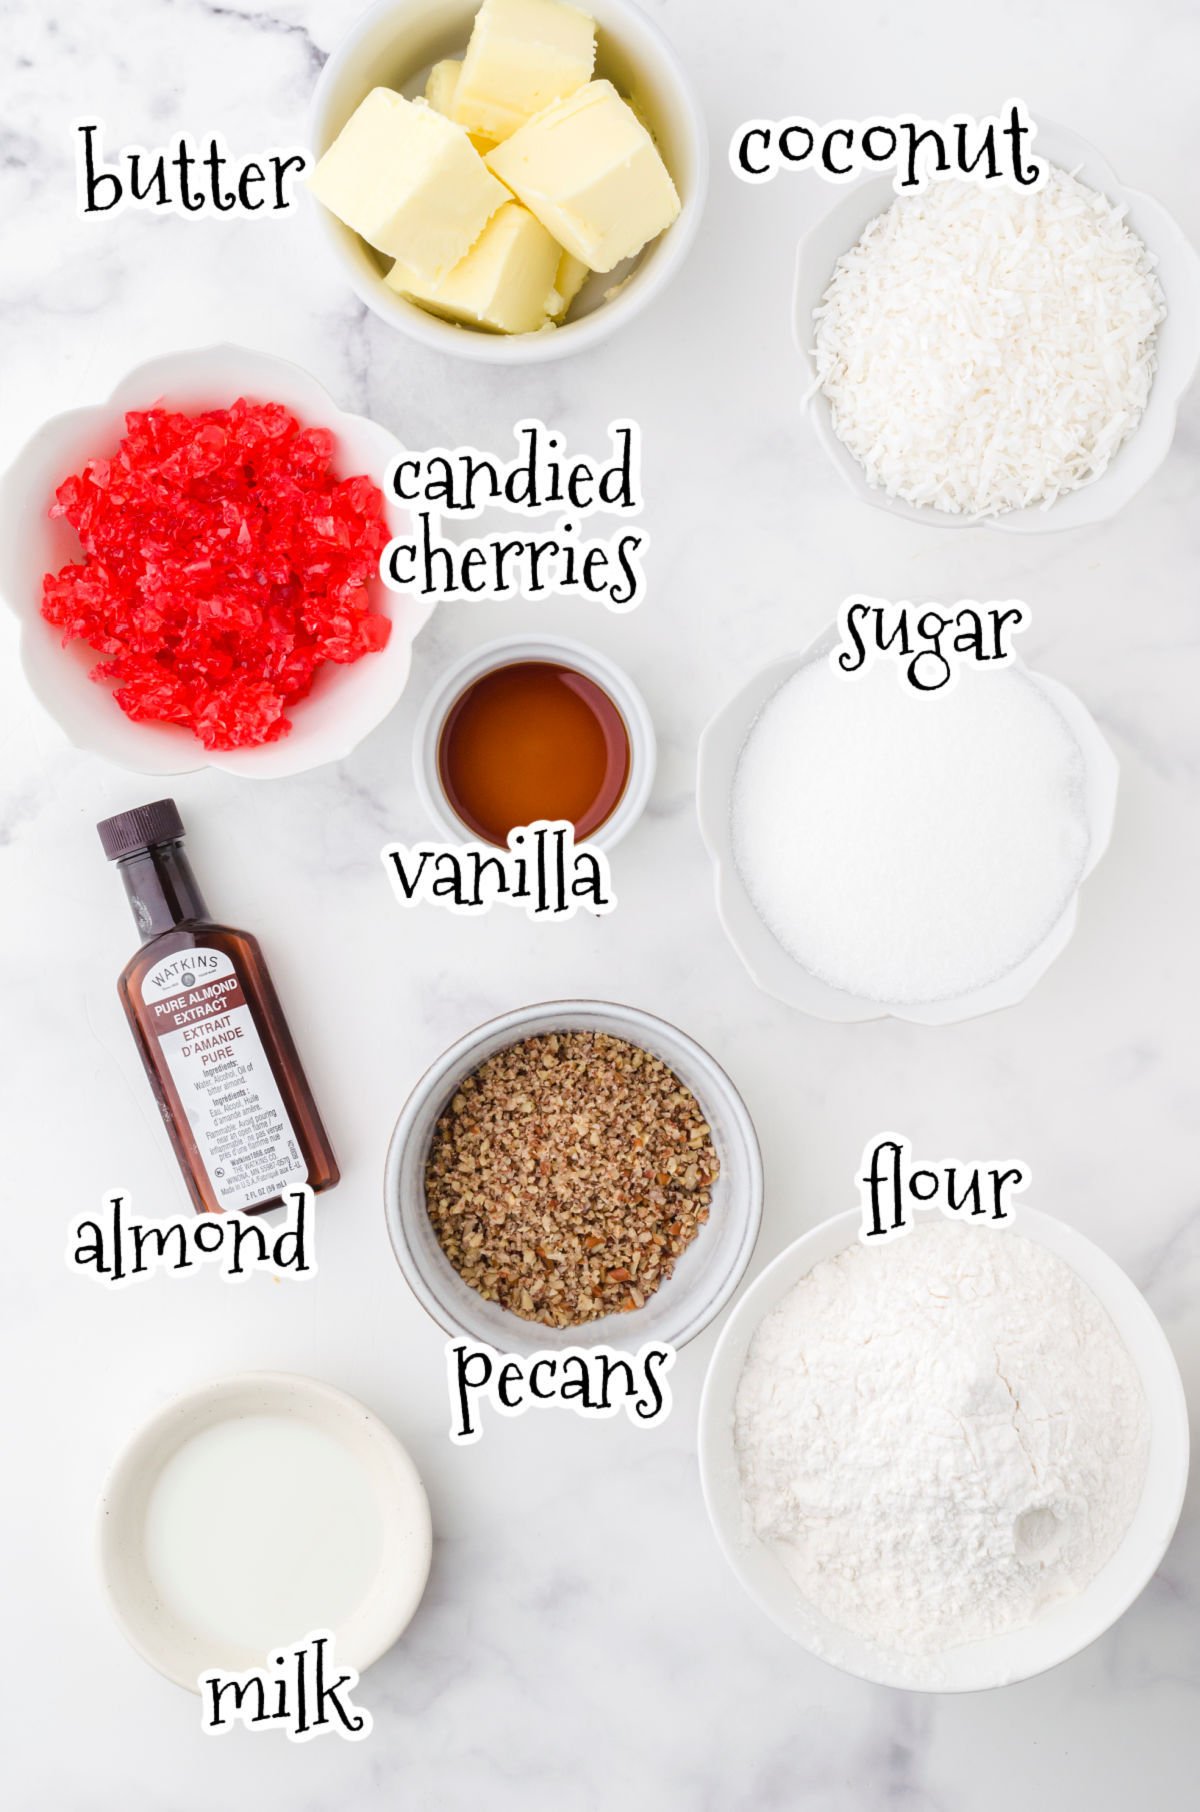 Labeled ingredients for this cookie recipe.